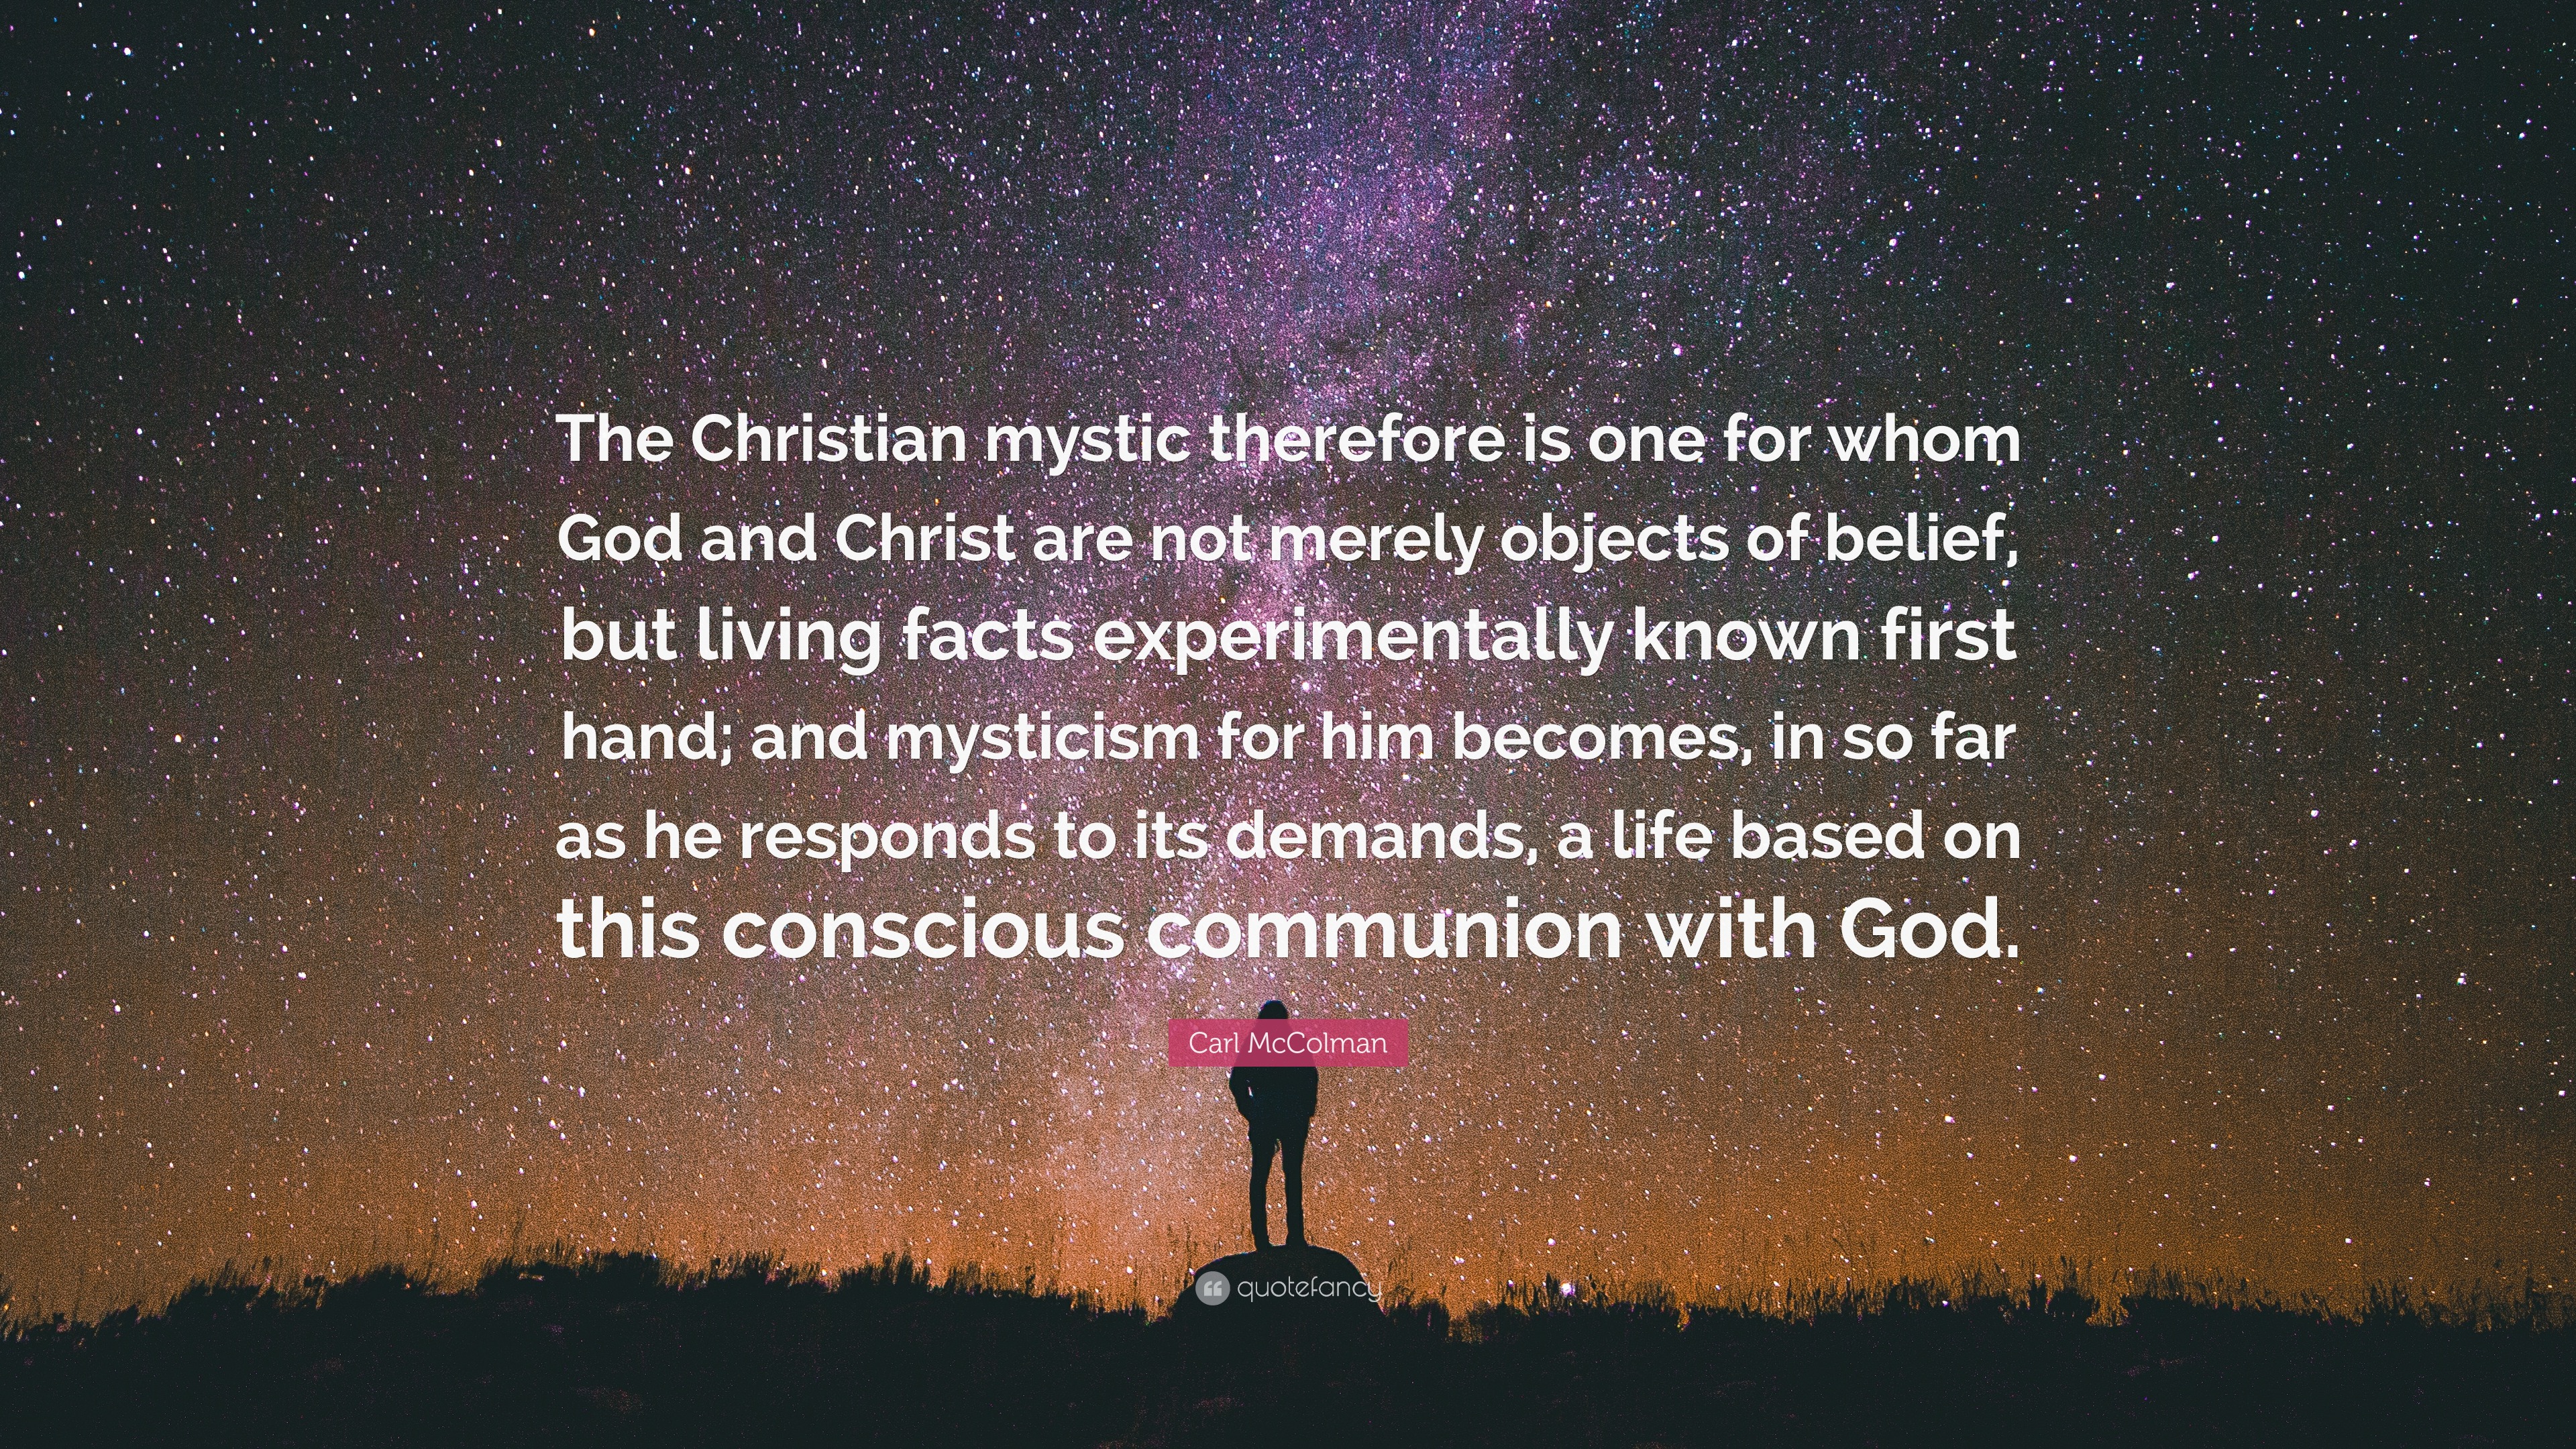 Carl McColman Quote: “The Christian mystic therefore is one for whom ...